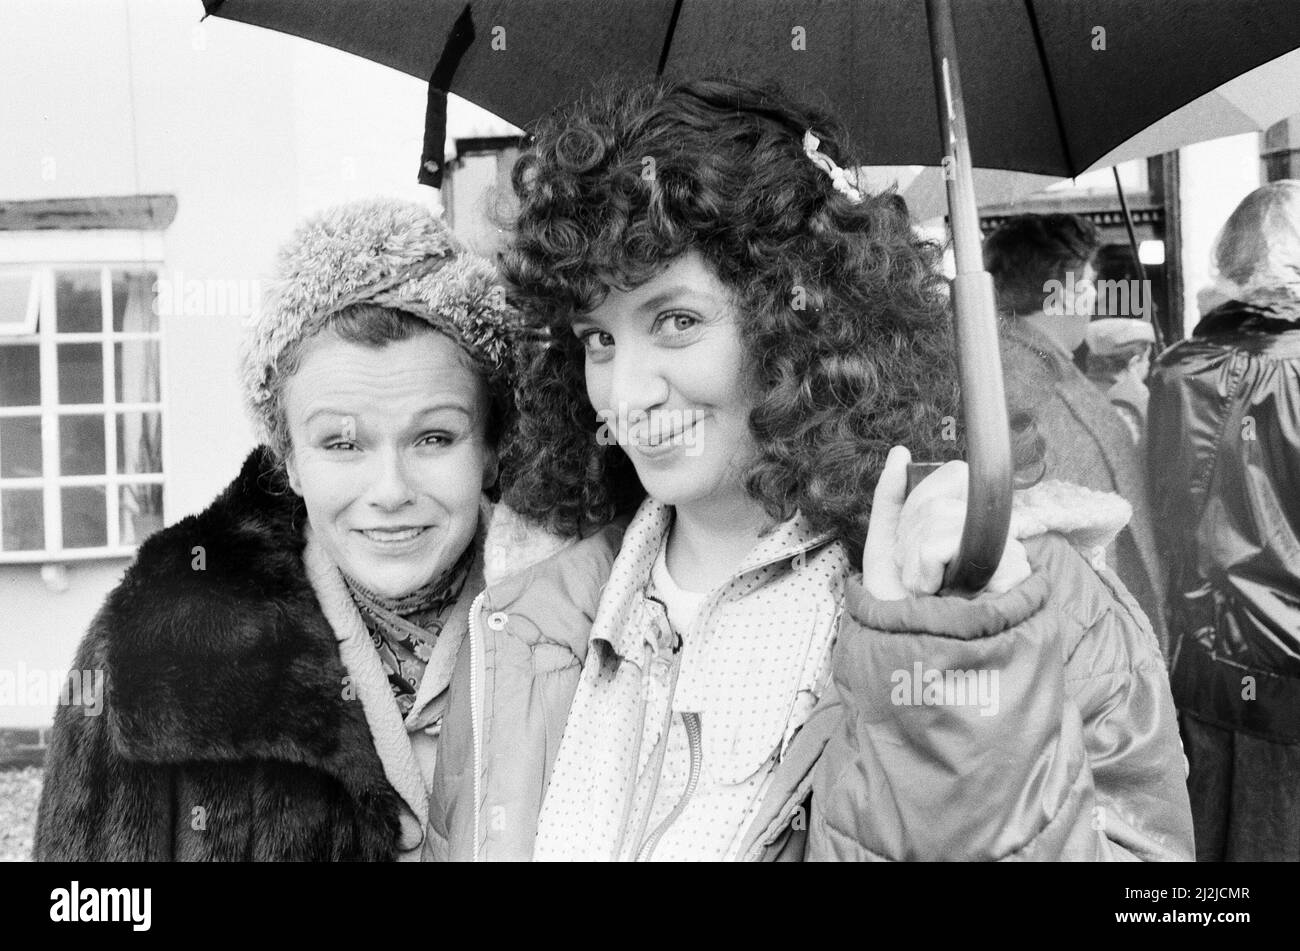 Victoria Wood As Seen on TV, television series, outdoor filming comedy sketches of Acorn Antiques, a spoof of a low budget soap opera, which appear in the show. June 1987. Pictured, Victoria Woods and Julie Walters. Stock Photo